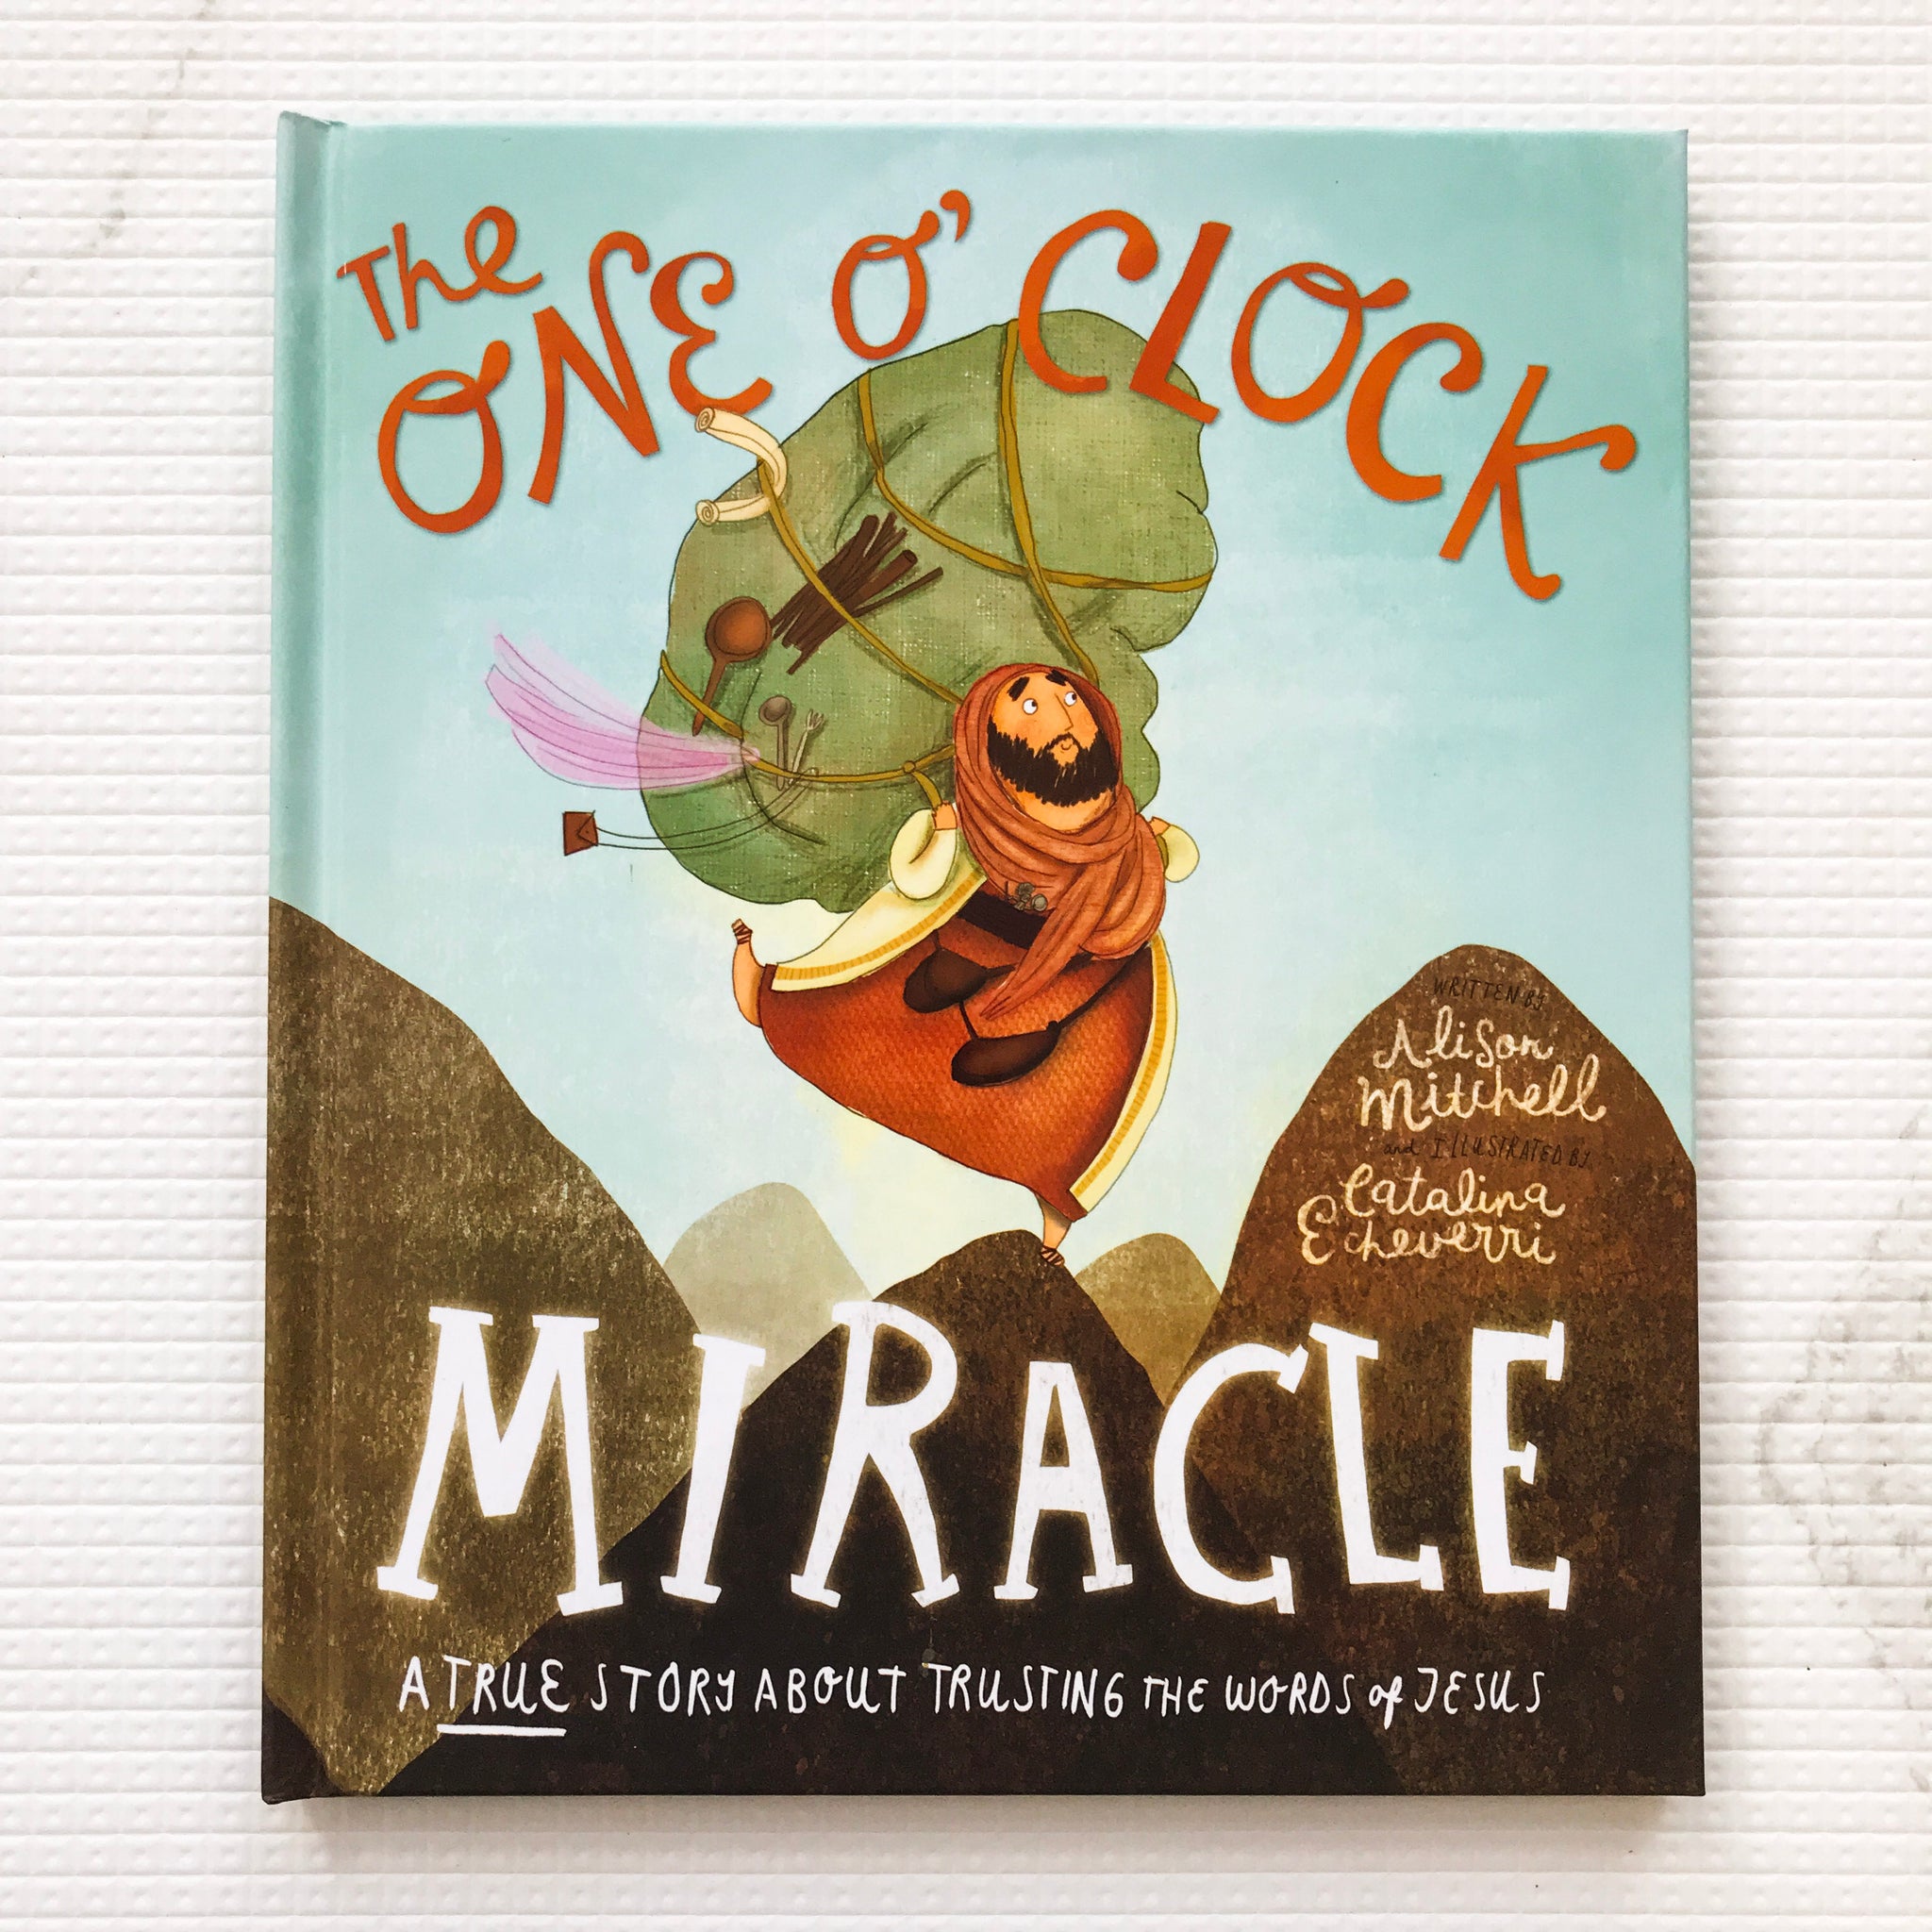 The One O'Clock Miracle: A true story about trusting the words of Jesus